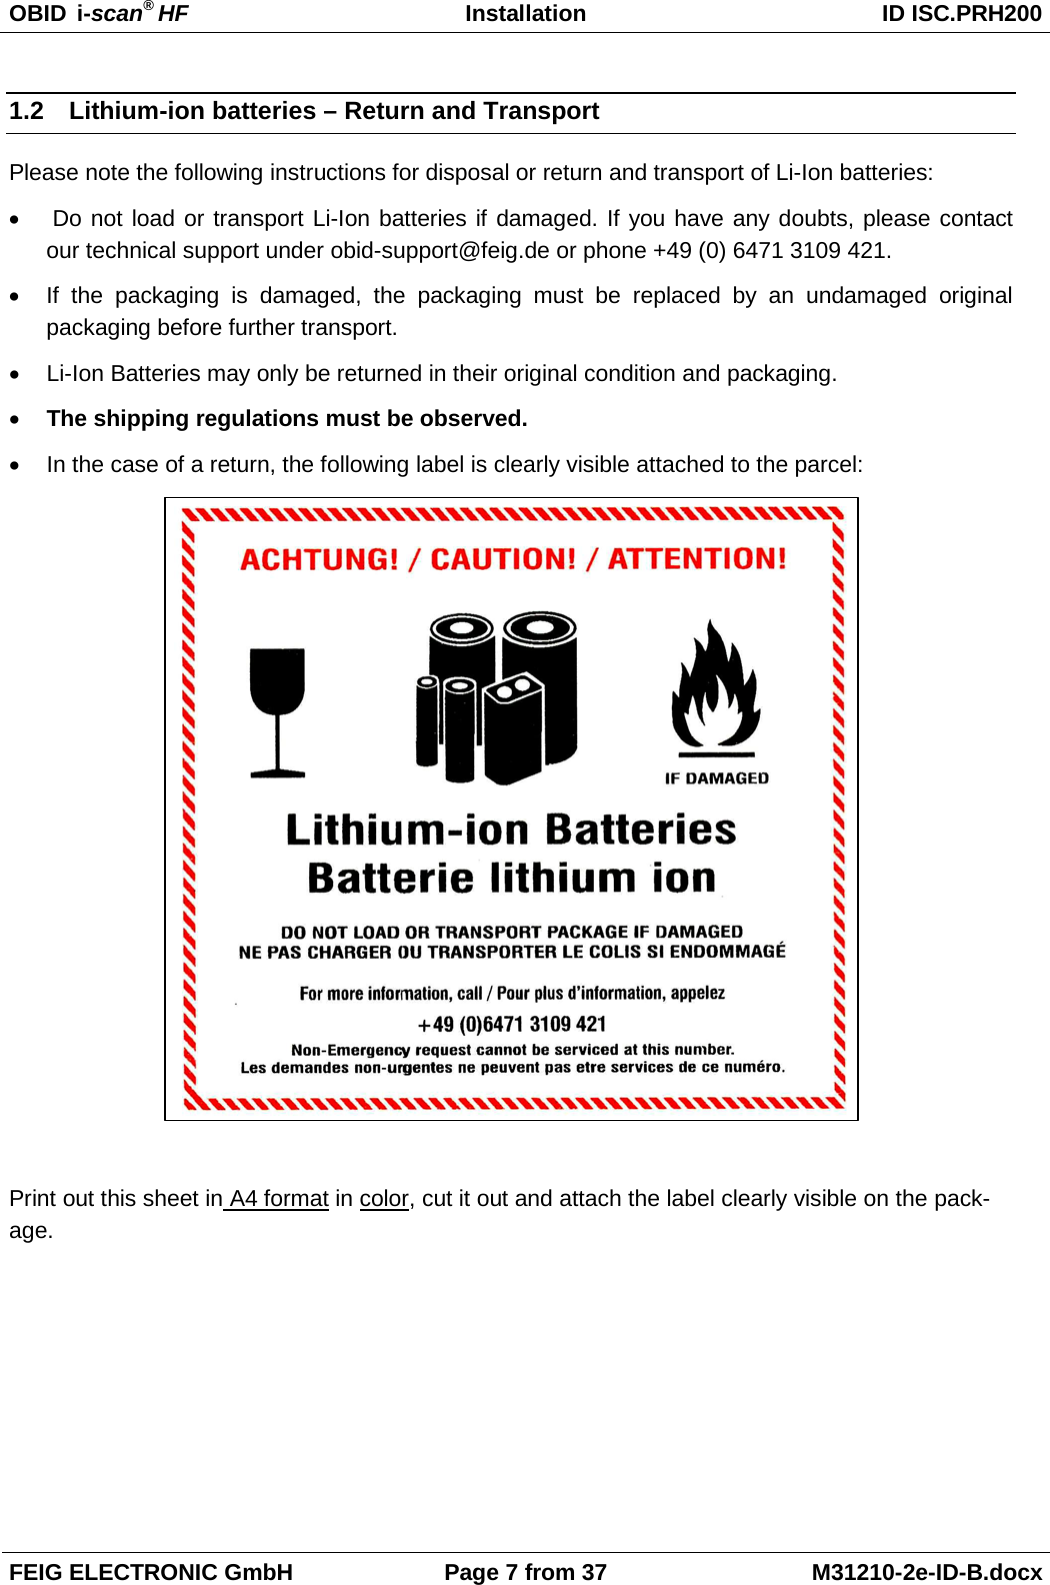 OBID  i-scan® HF Installation ID ISC.PRH200  FEIG ELECTRONIC GmbH Page 7 from 37 M31210-2e-ID-B.docx  1.2 Lithium-ion batteries – Return and Transport Please note the following instructions for disposal or return and transport of Li-Ion batteries: •   Do not load or transport Li-Ion batteries if damaged. If you have any doubts, please contact our technical support under obid-support@feig.de or phone +49 (0) 6471 3109 421. • If the packaging is damaged, the packaging must be replaced by an undamaged original packaging before further transport. • Li-Ion Batteries may only be returned in their original condition and packaging. • The shipping regulations must be observed. • In the case of a return, the following label is clearly visible attached to the parcel:    Print out this sheet in A4 format in color, cut it out and attach the label clearly visible on the pack-age.  